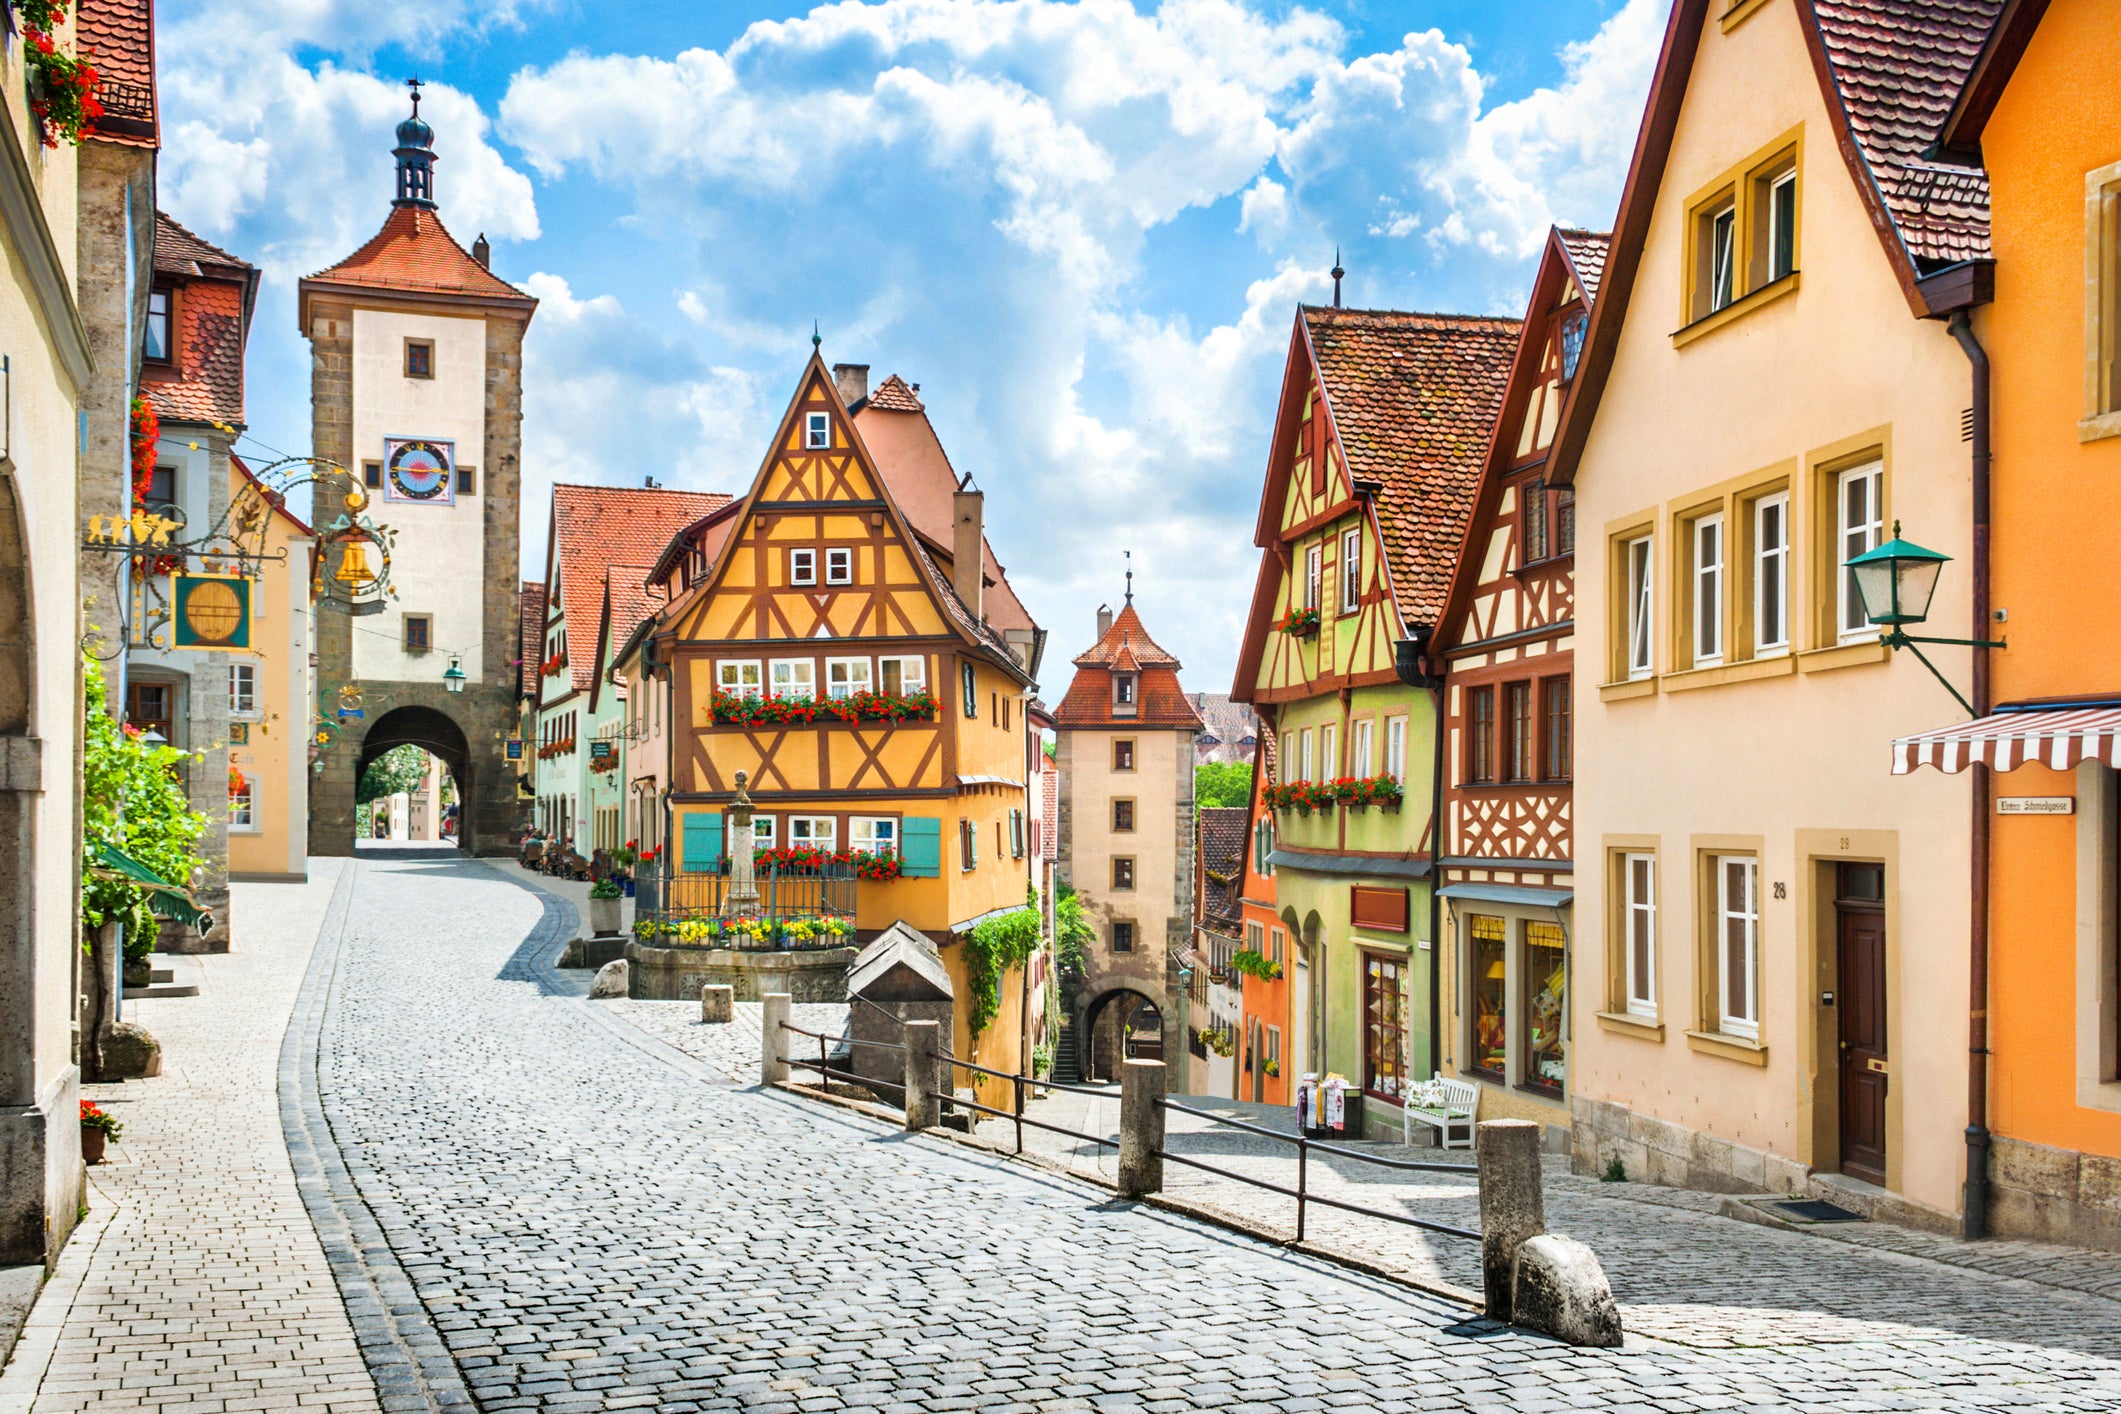 The authentic charm of Bavaria, Germany’s largest state